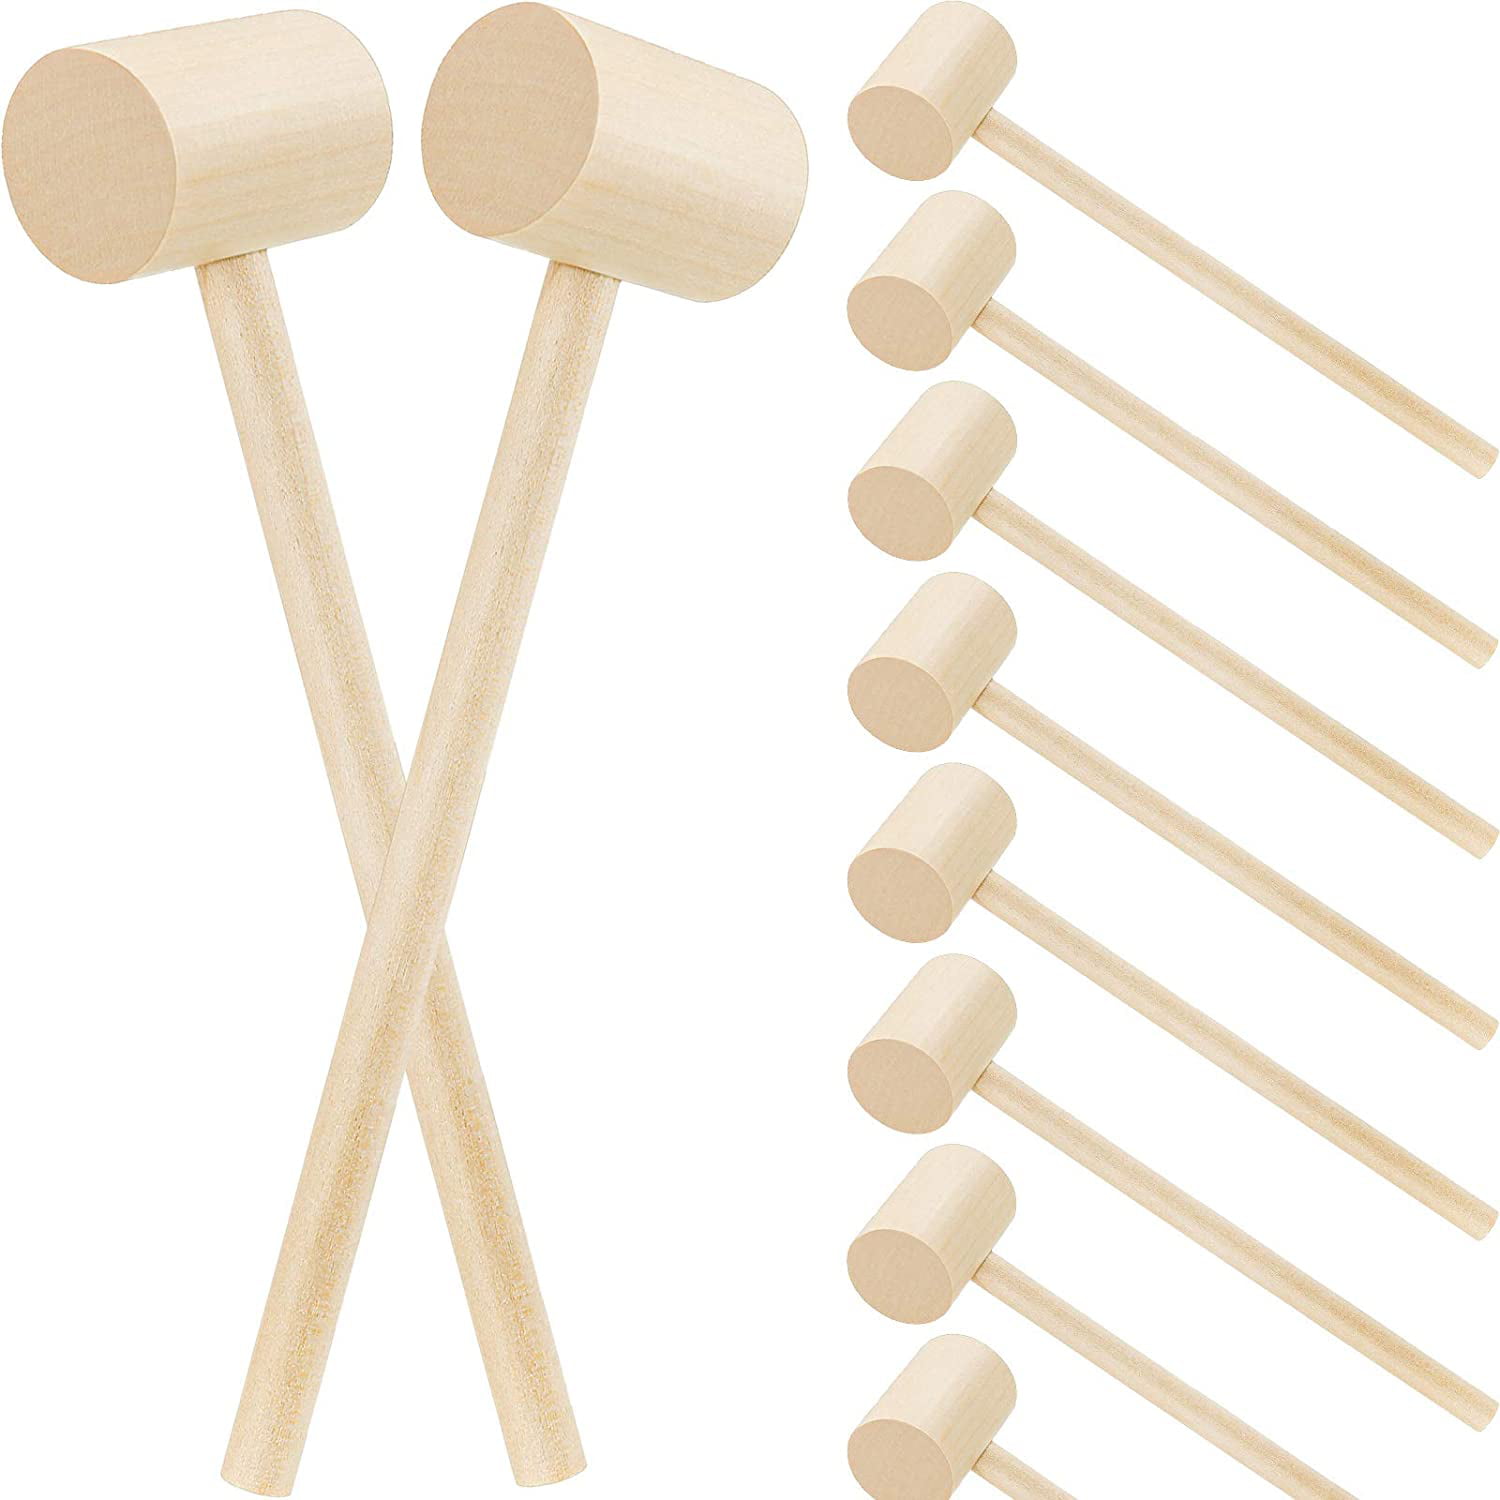 Toy Mallet Pounding Toy Wooden Hammers Crab Lobster Mallets Seafood Tools 